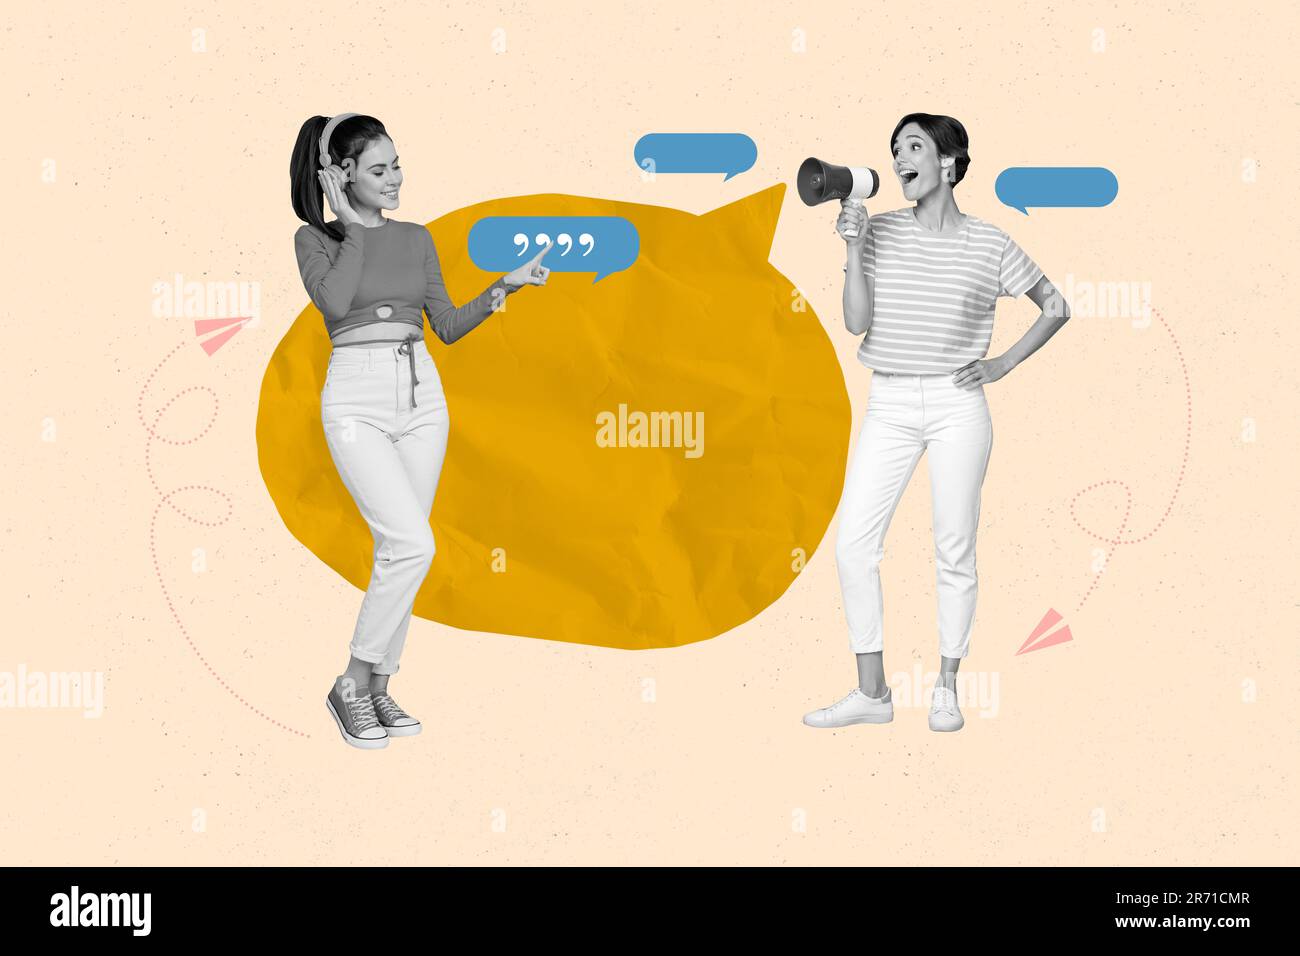 Promoters collage illustration two women speech loudspeaker new promo proposition quotes listen headphones isolated on beige background Stock Photo